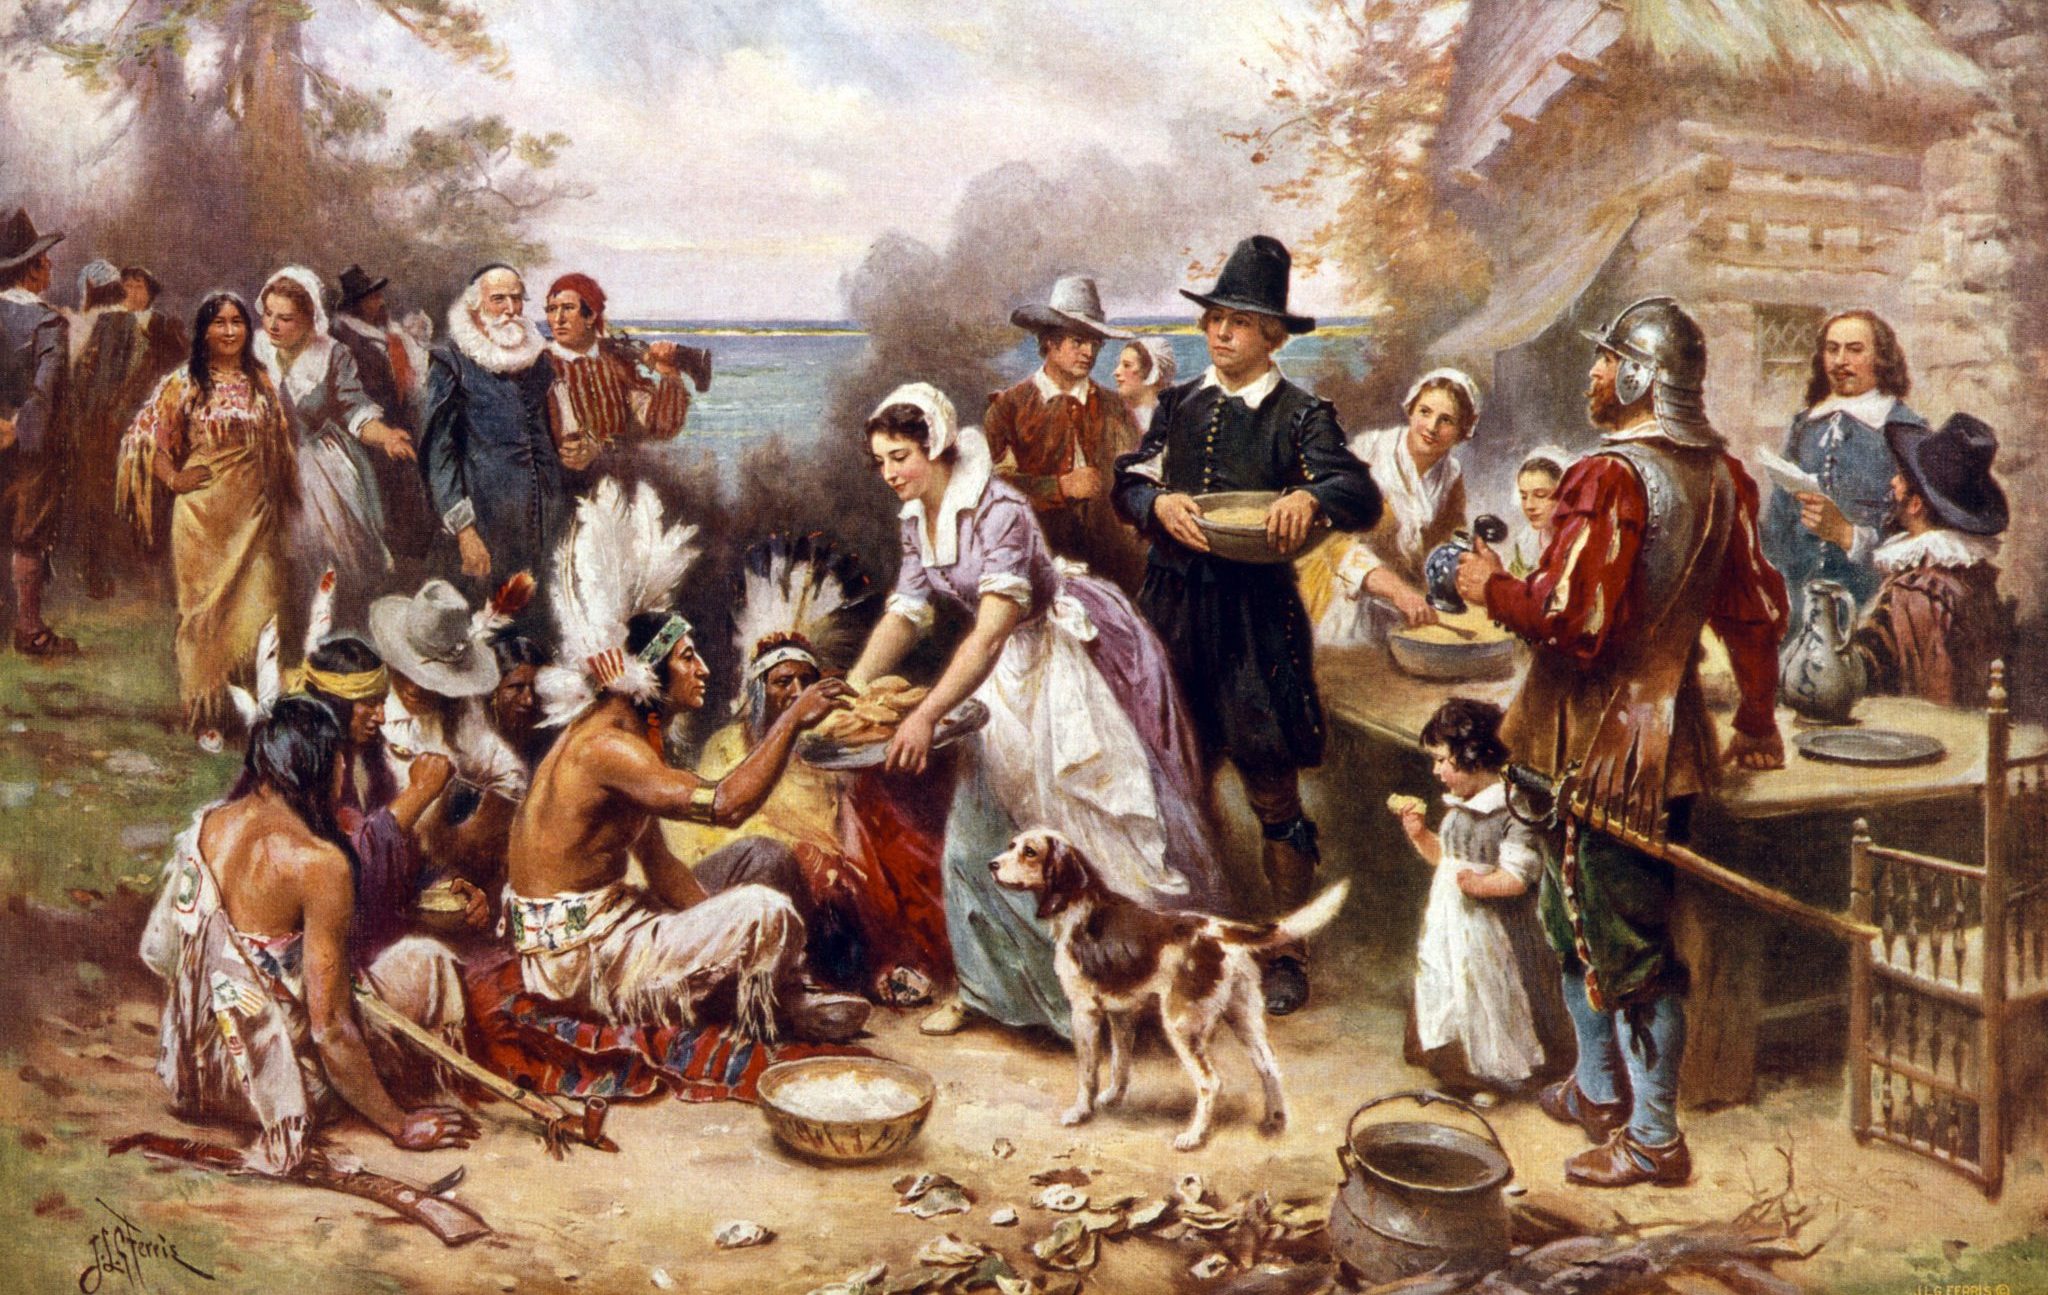 The,First,Thanksgiving,,1621,,Pilgrims,And,Natives,Gather,To,Share